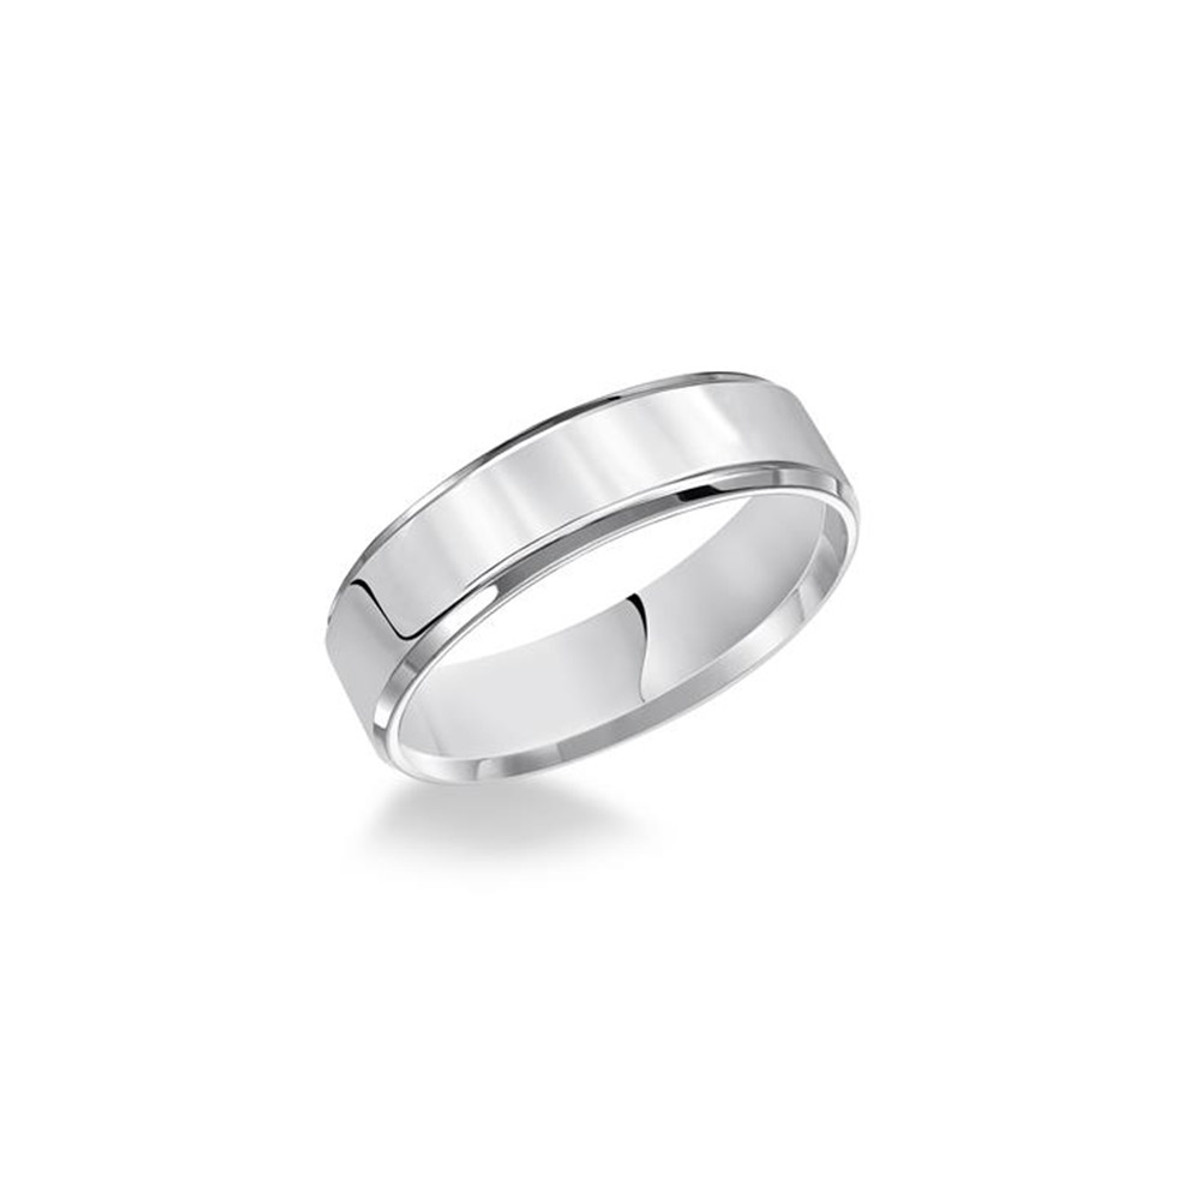 Hyde Park Collection Platinum Bevel Edge Band-44263 Product Image